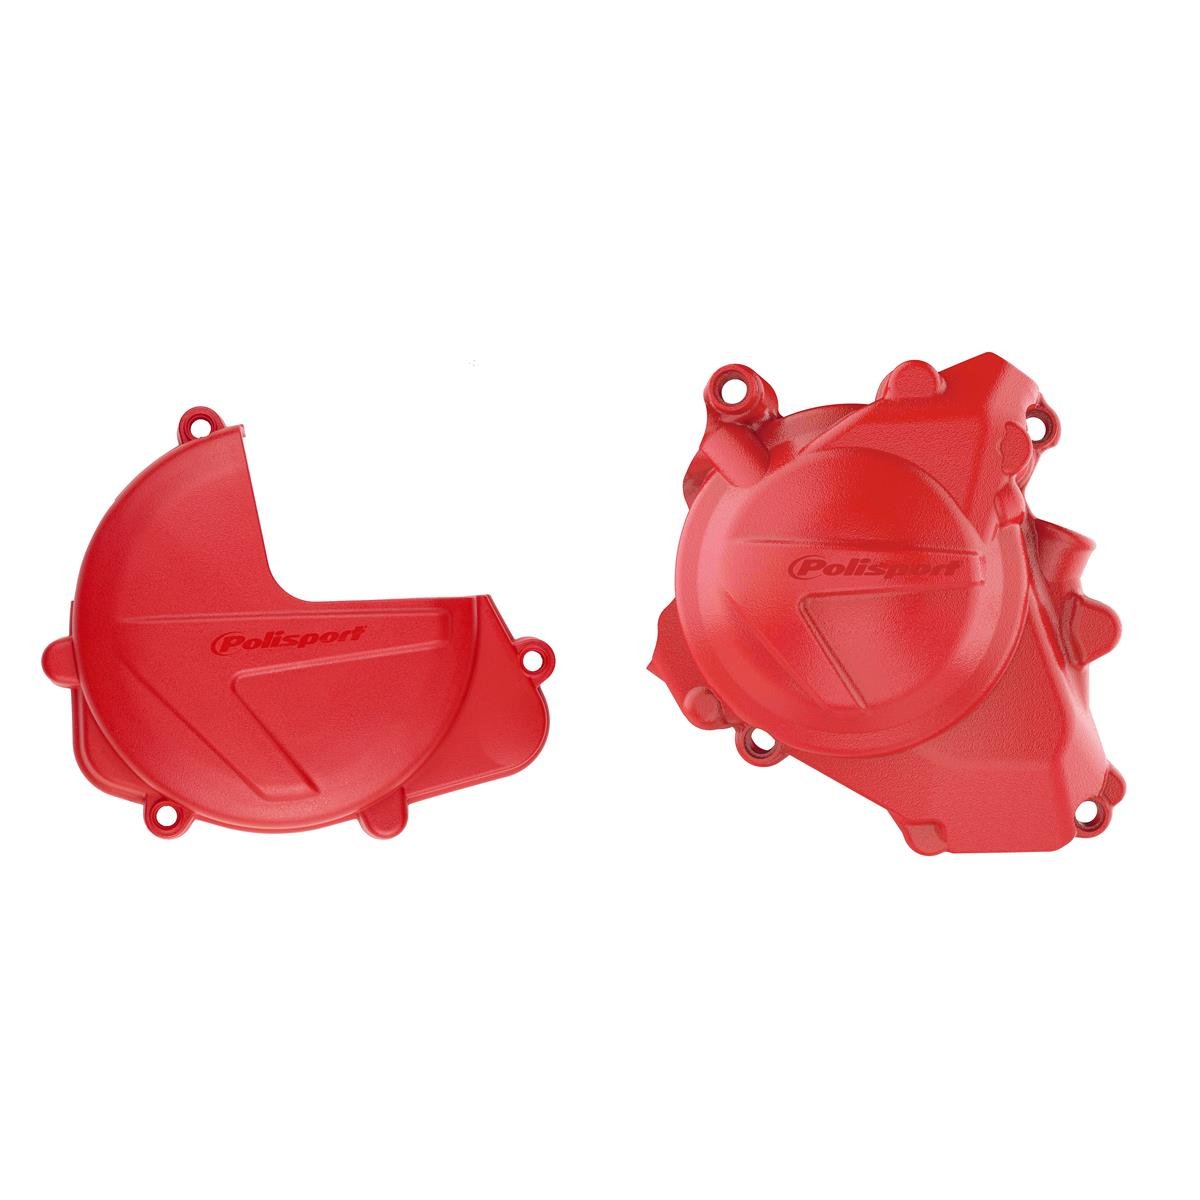 Polisport Clutch/Ignition Cover Protection  Honda CRF 450 17-20, Red